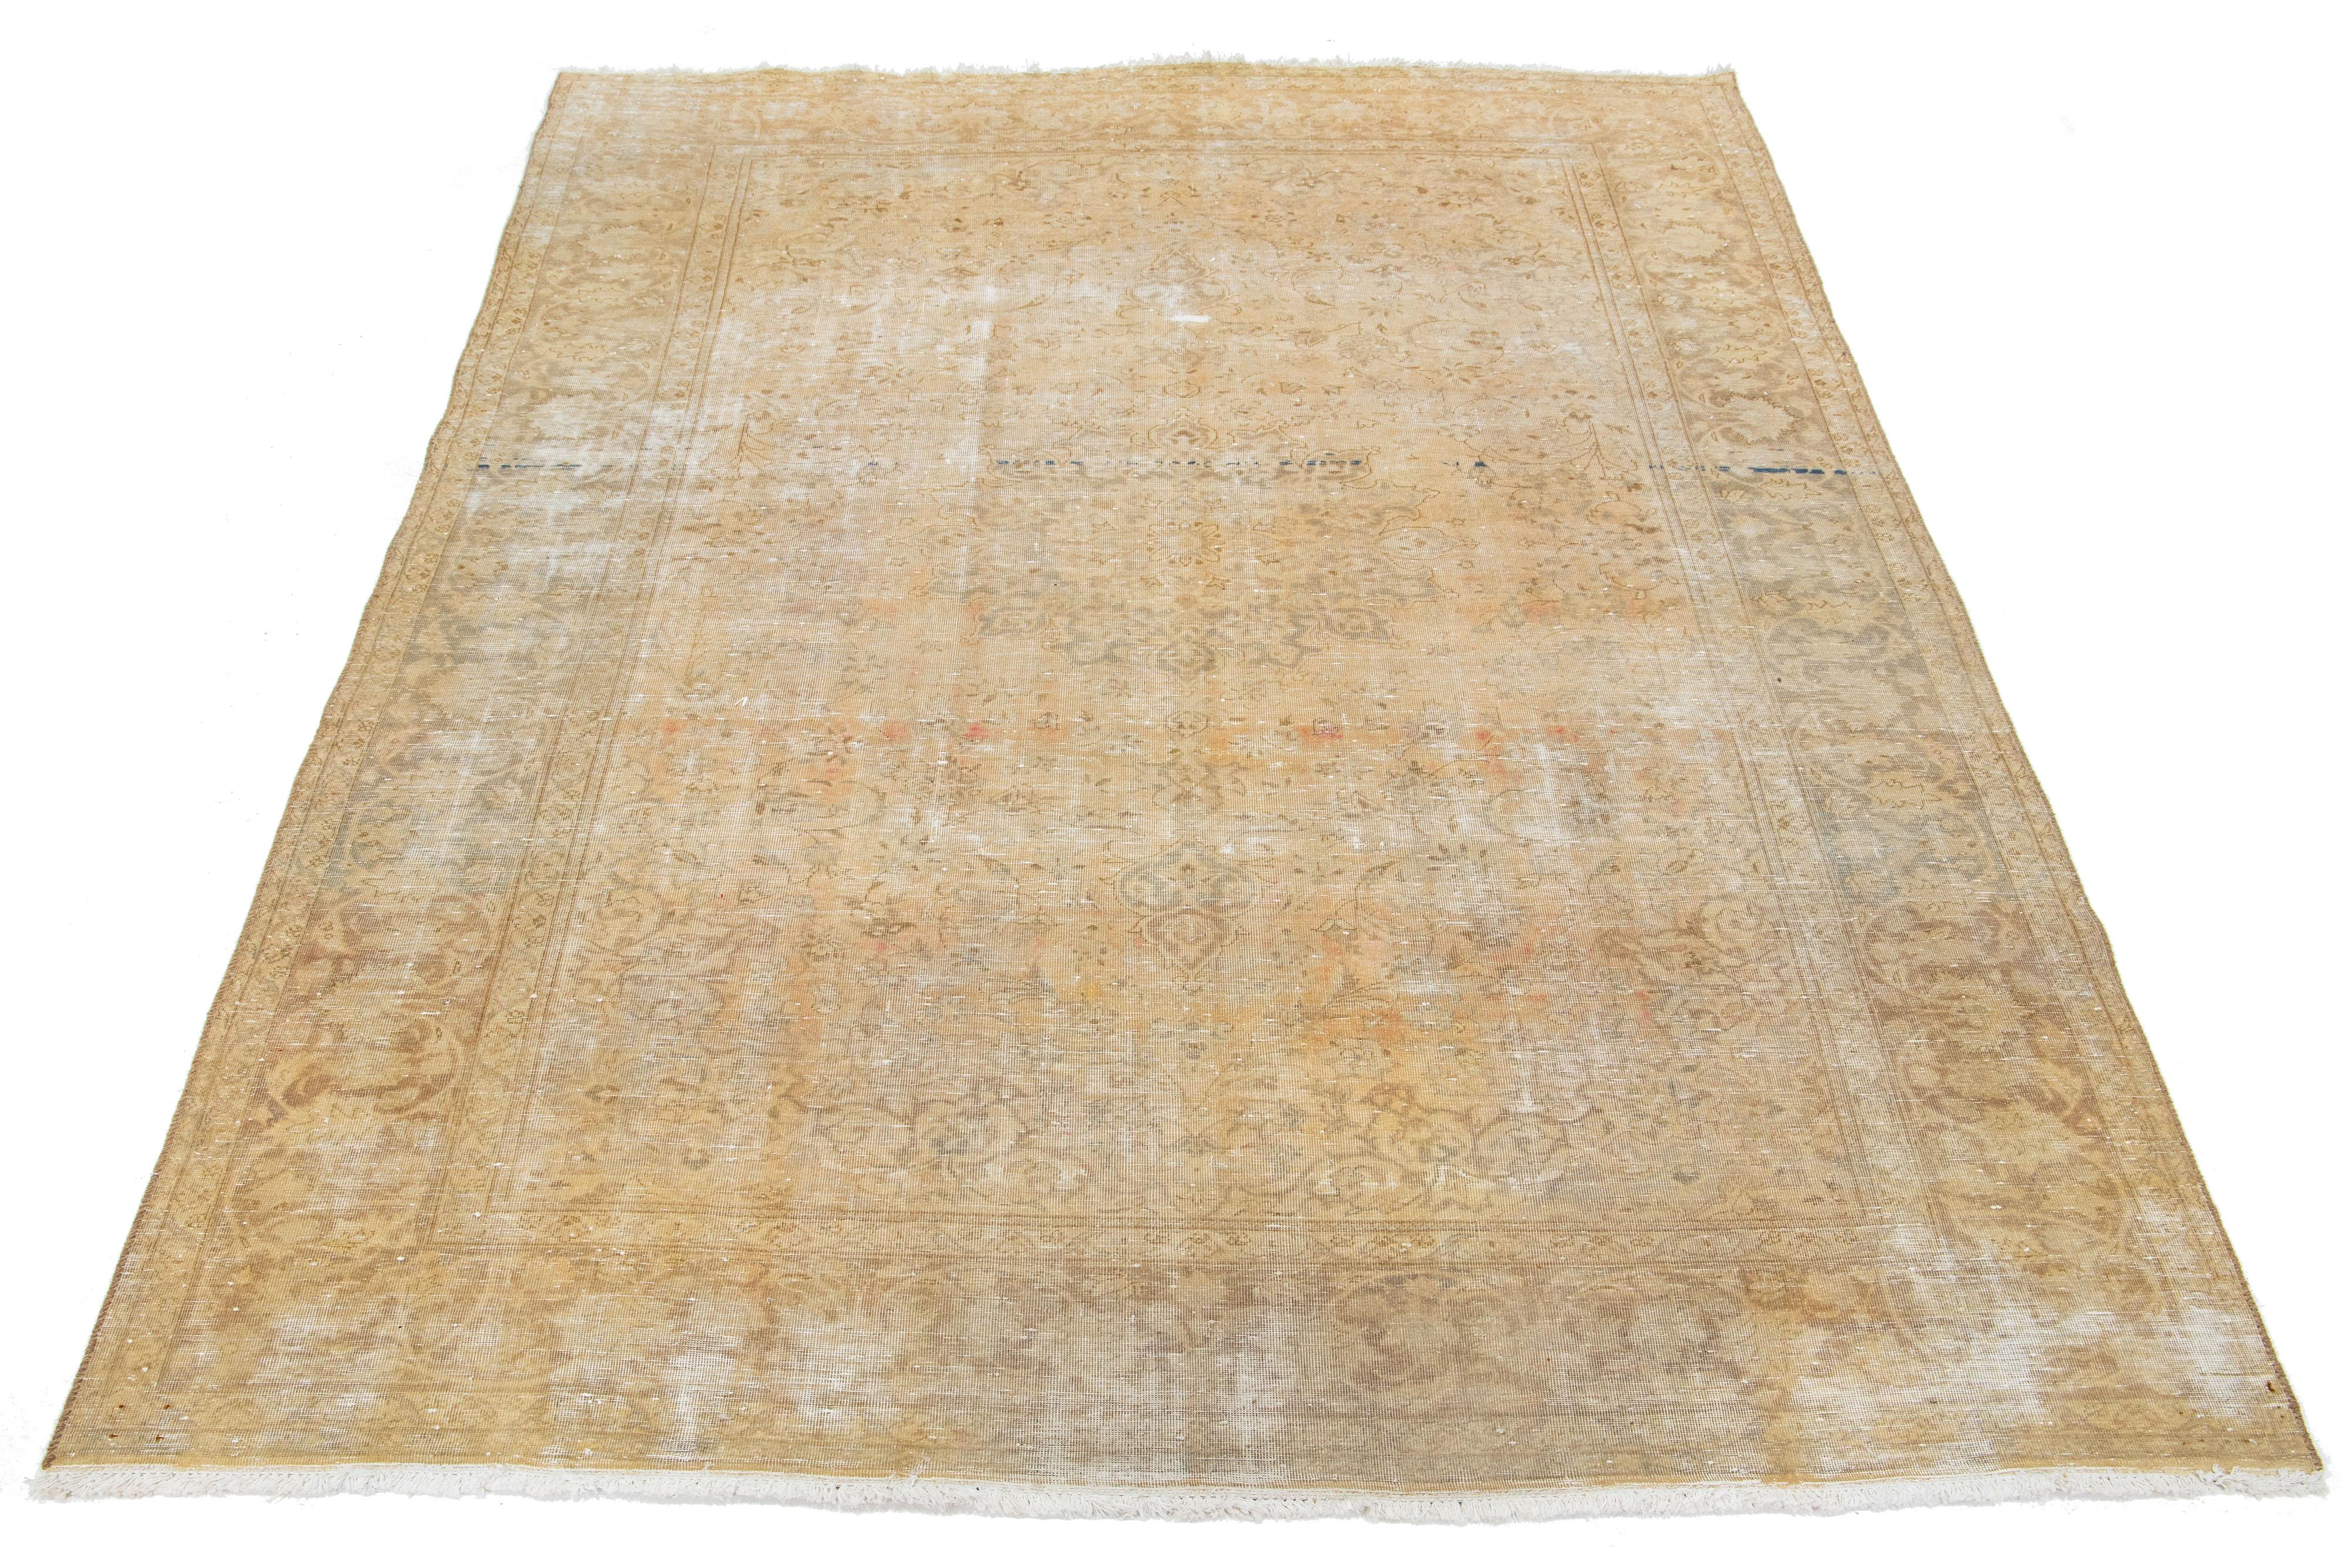 Beautiful Vintage Mahal hand-knotted wool rug with a beige color field. This Persian rug has gray and brown hues throughout the floral motif.

This rug measures 7' x 10'6